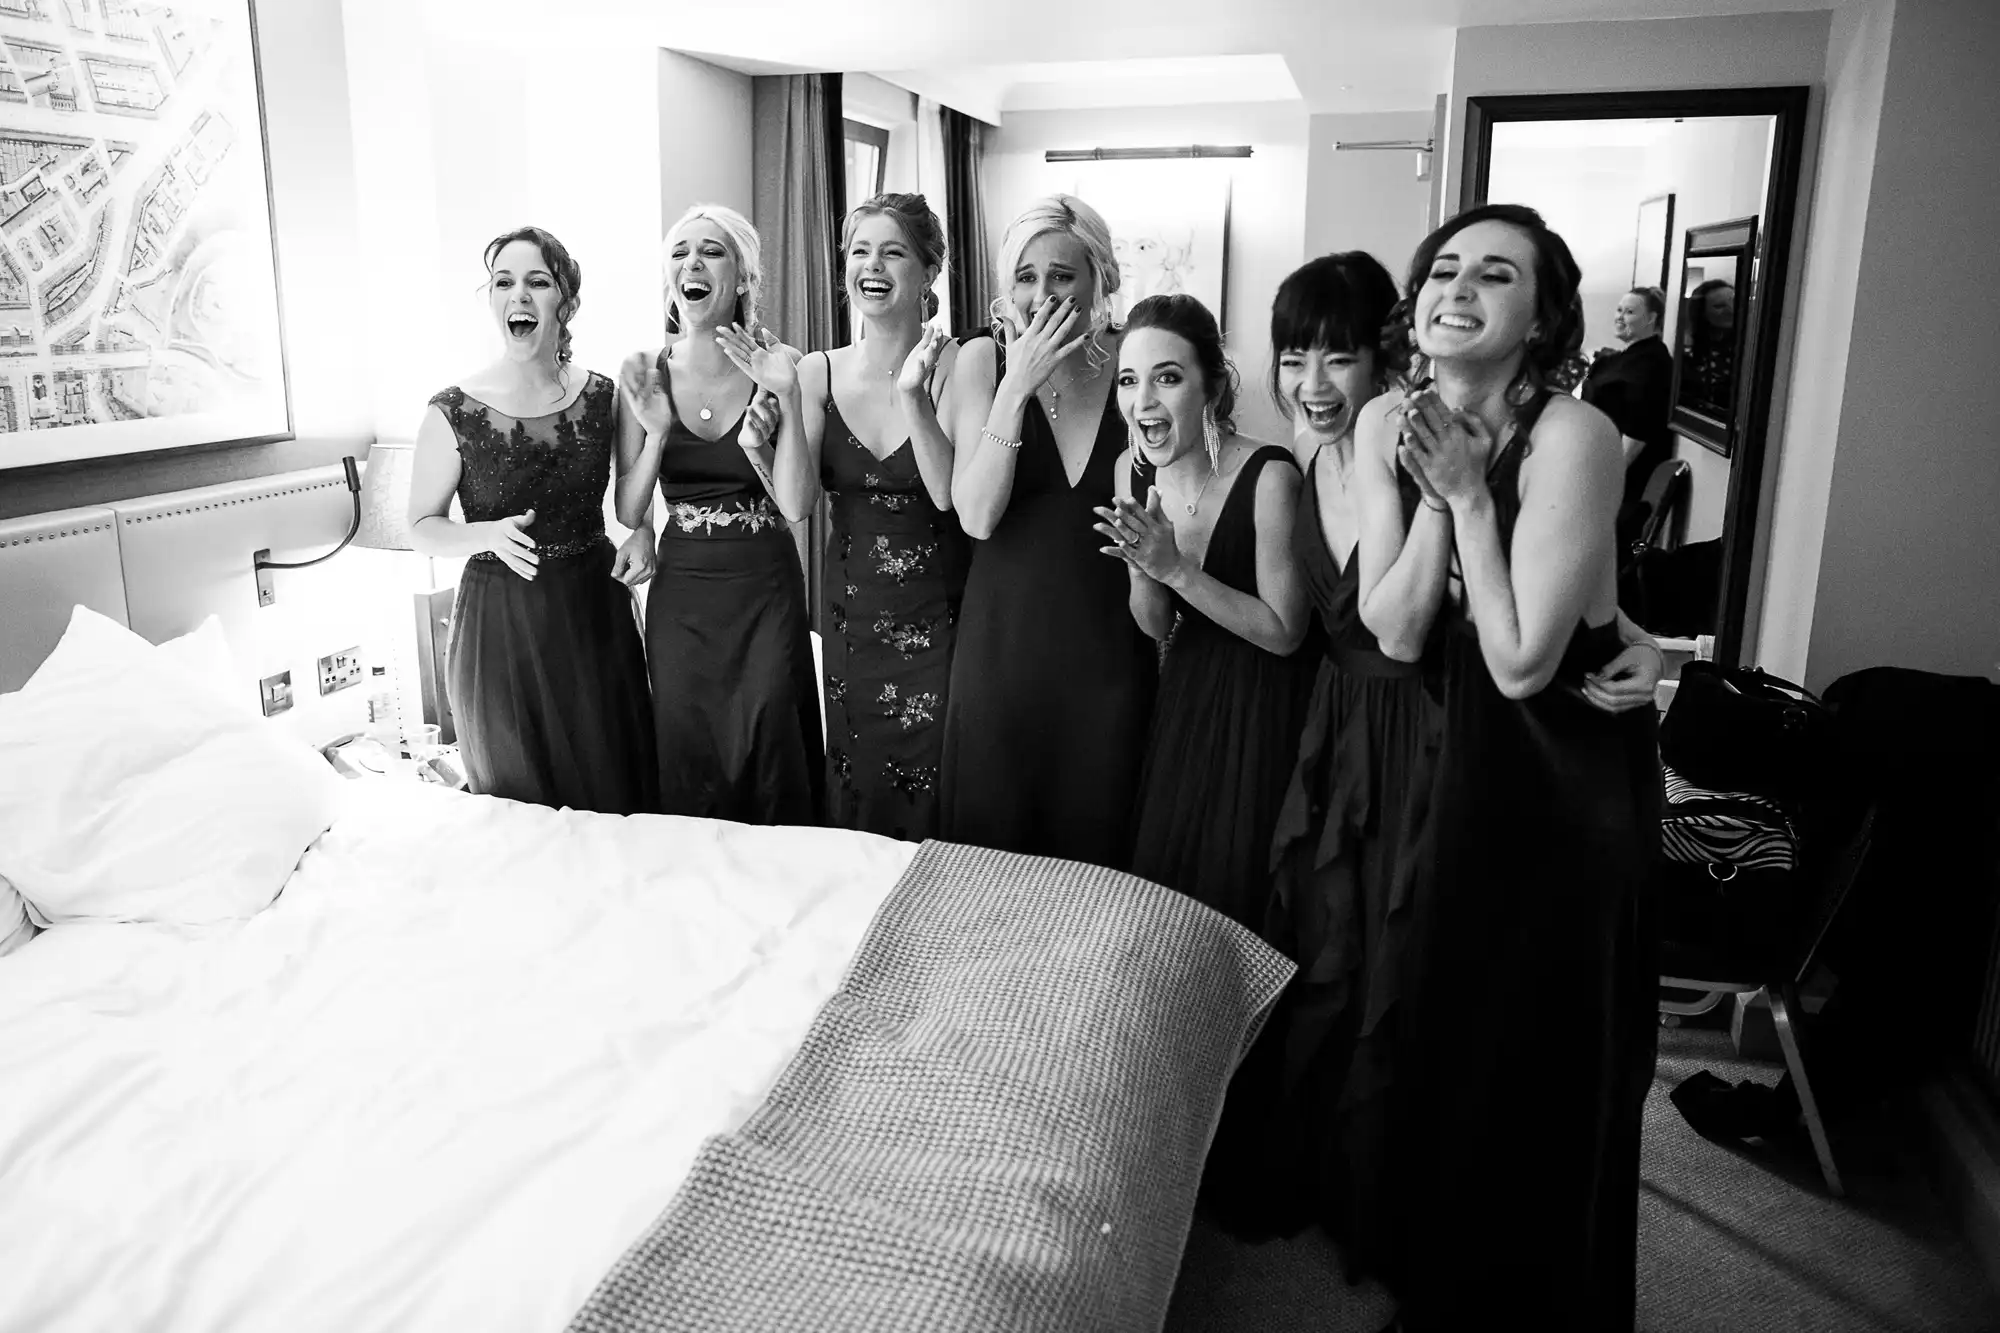 A group of seven bridesmaids in formal dresses stand close together in a bedroom, smiling and expressing excitement as they see the bride for the first time.